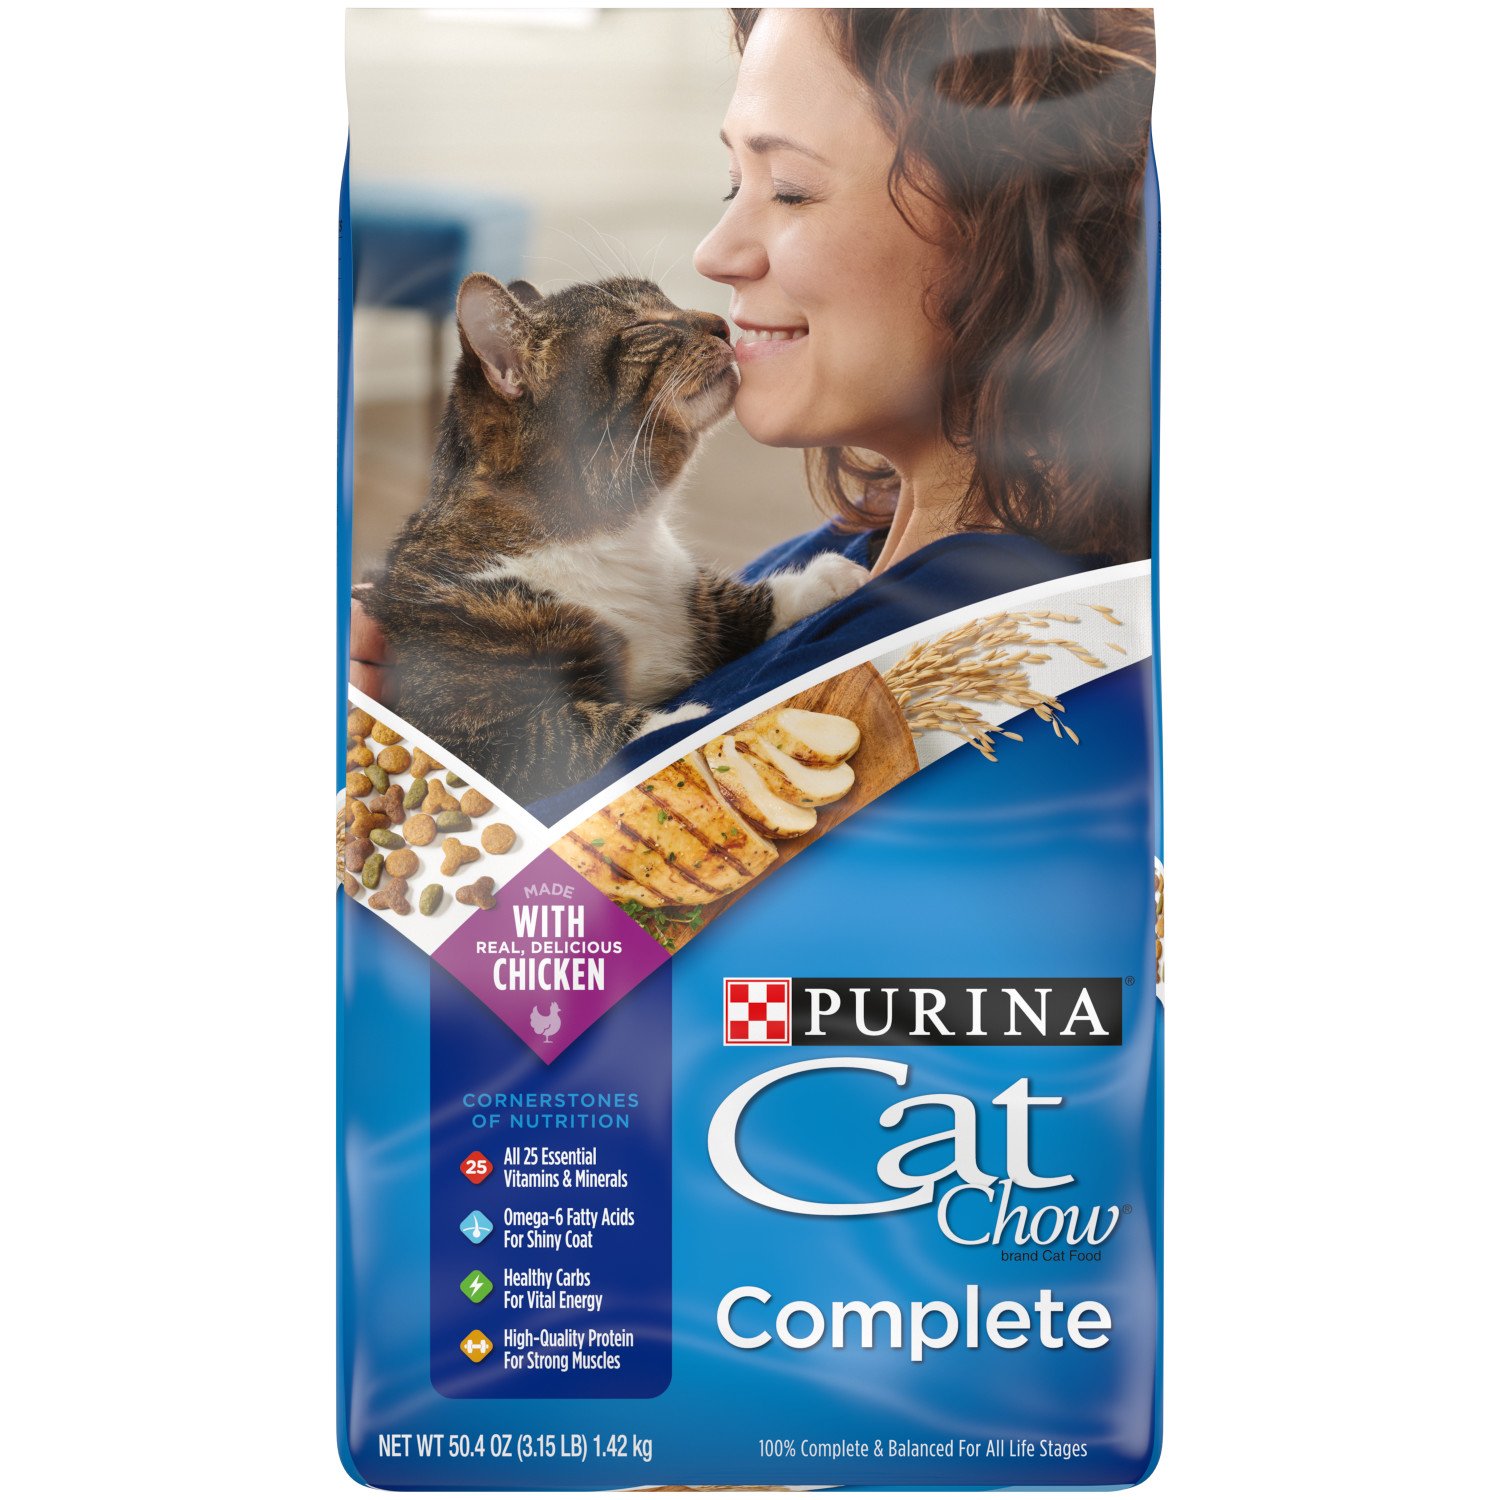 purina cat chow complete ingredients